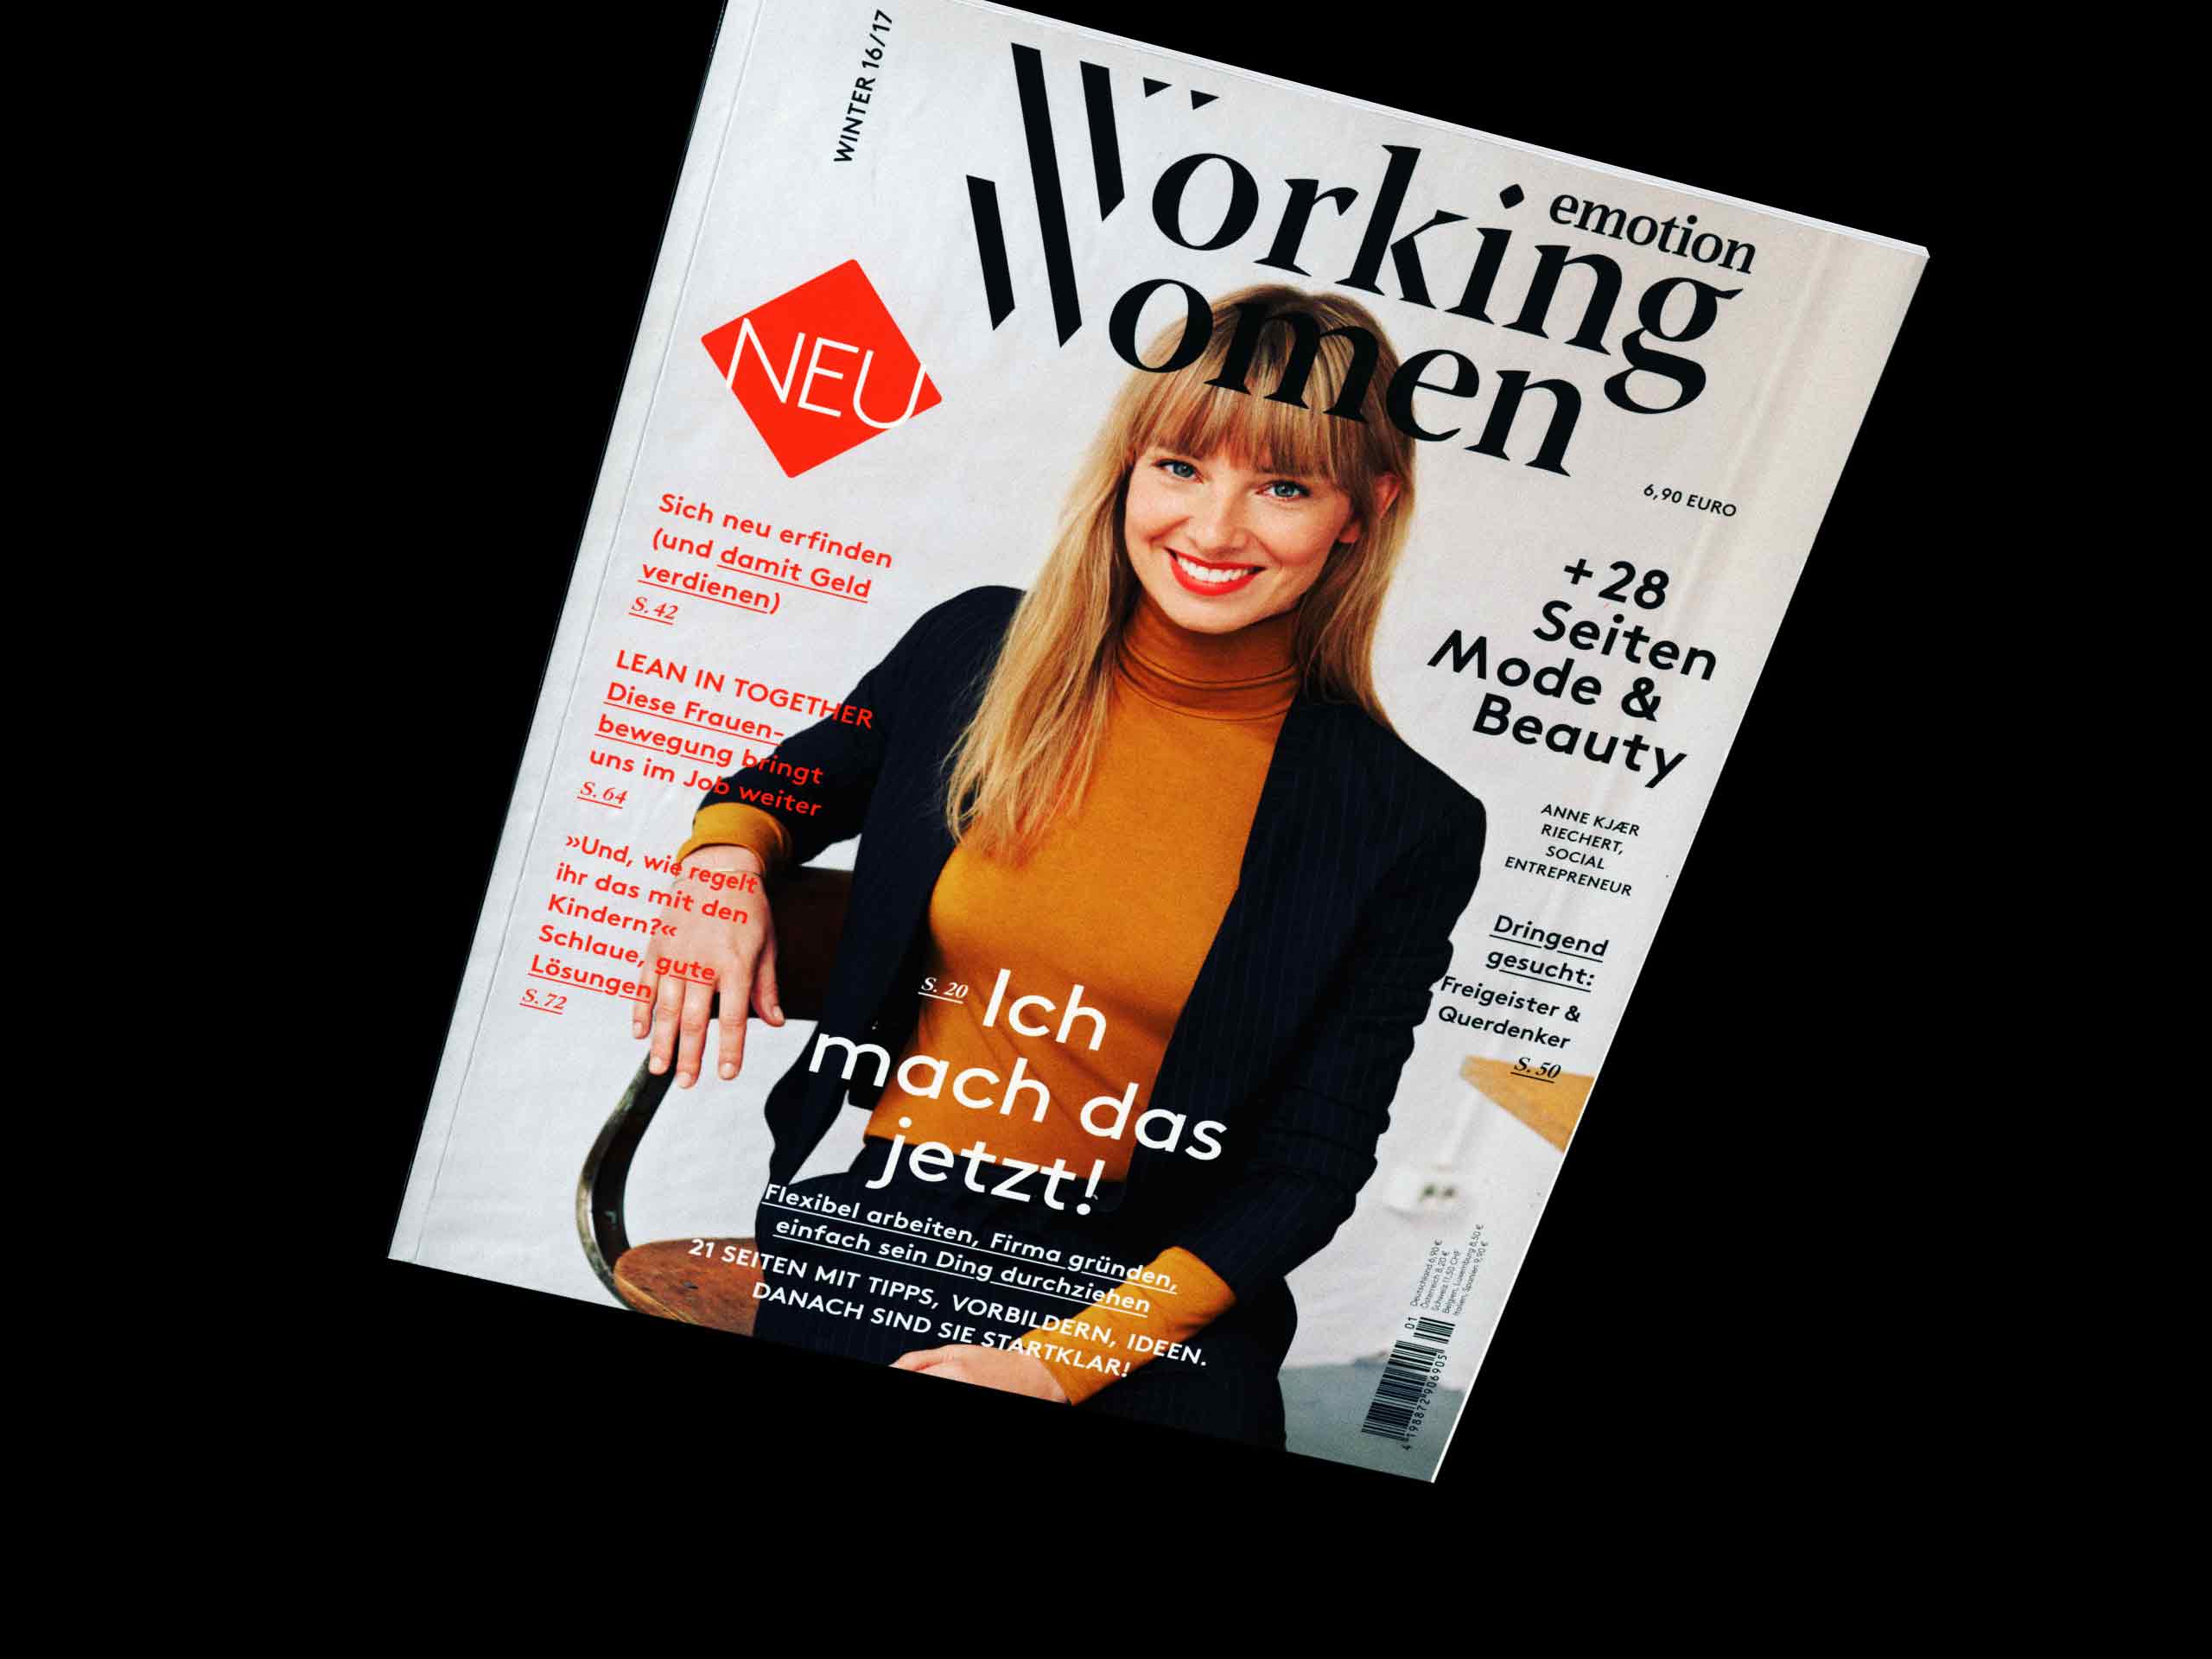 A magazine for women who dare to rethink work